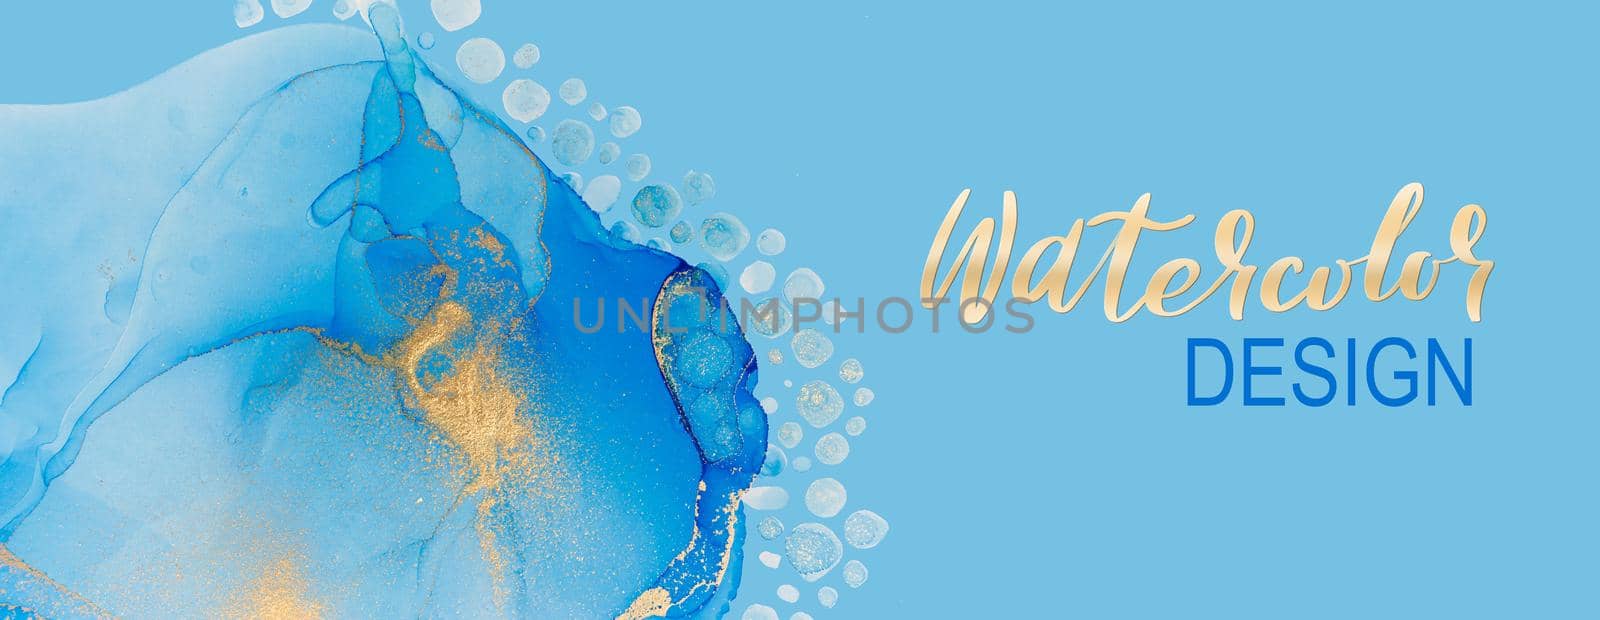 Abstract blue watercolor pattern with drops, blobs and golden parts by AnaBabii